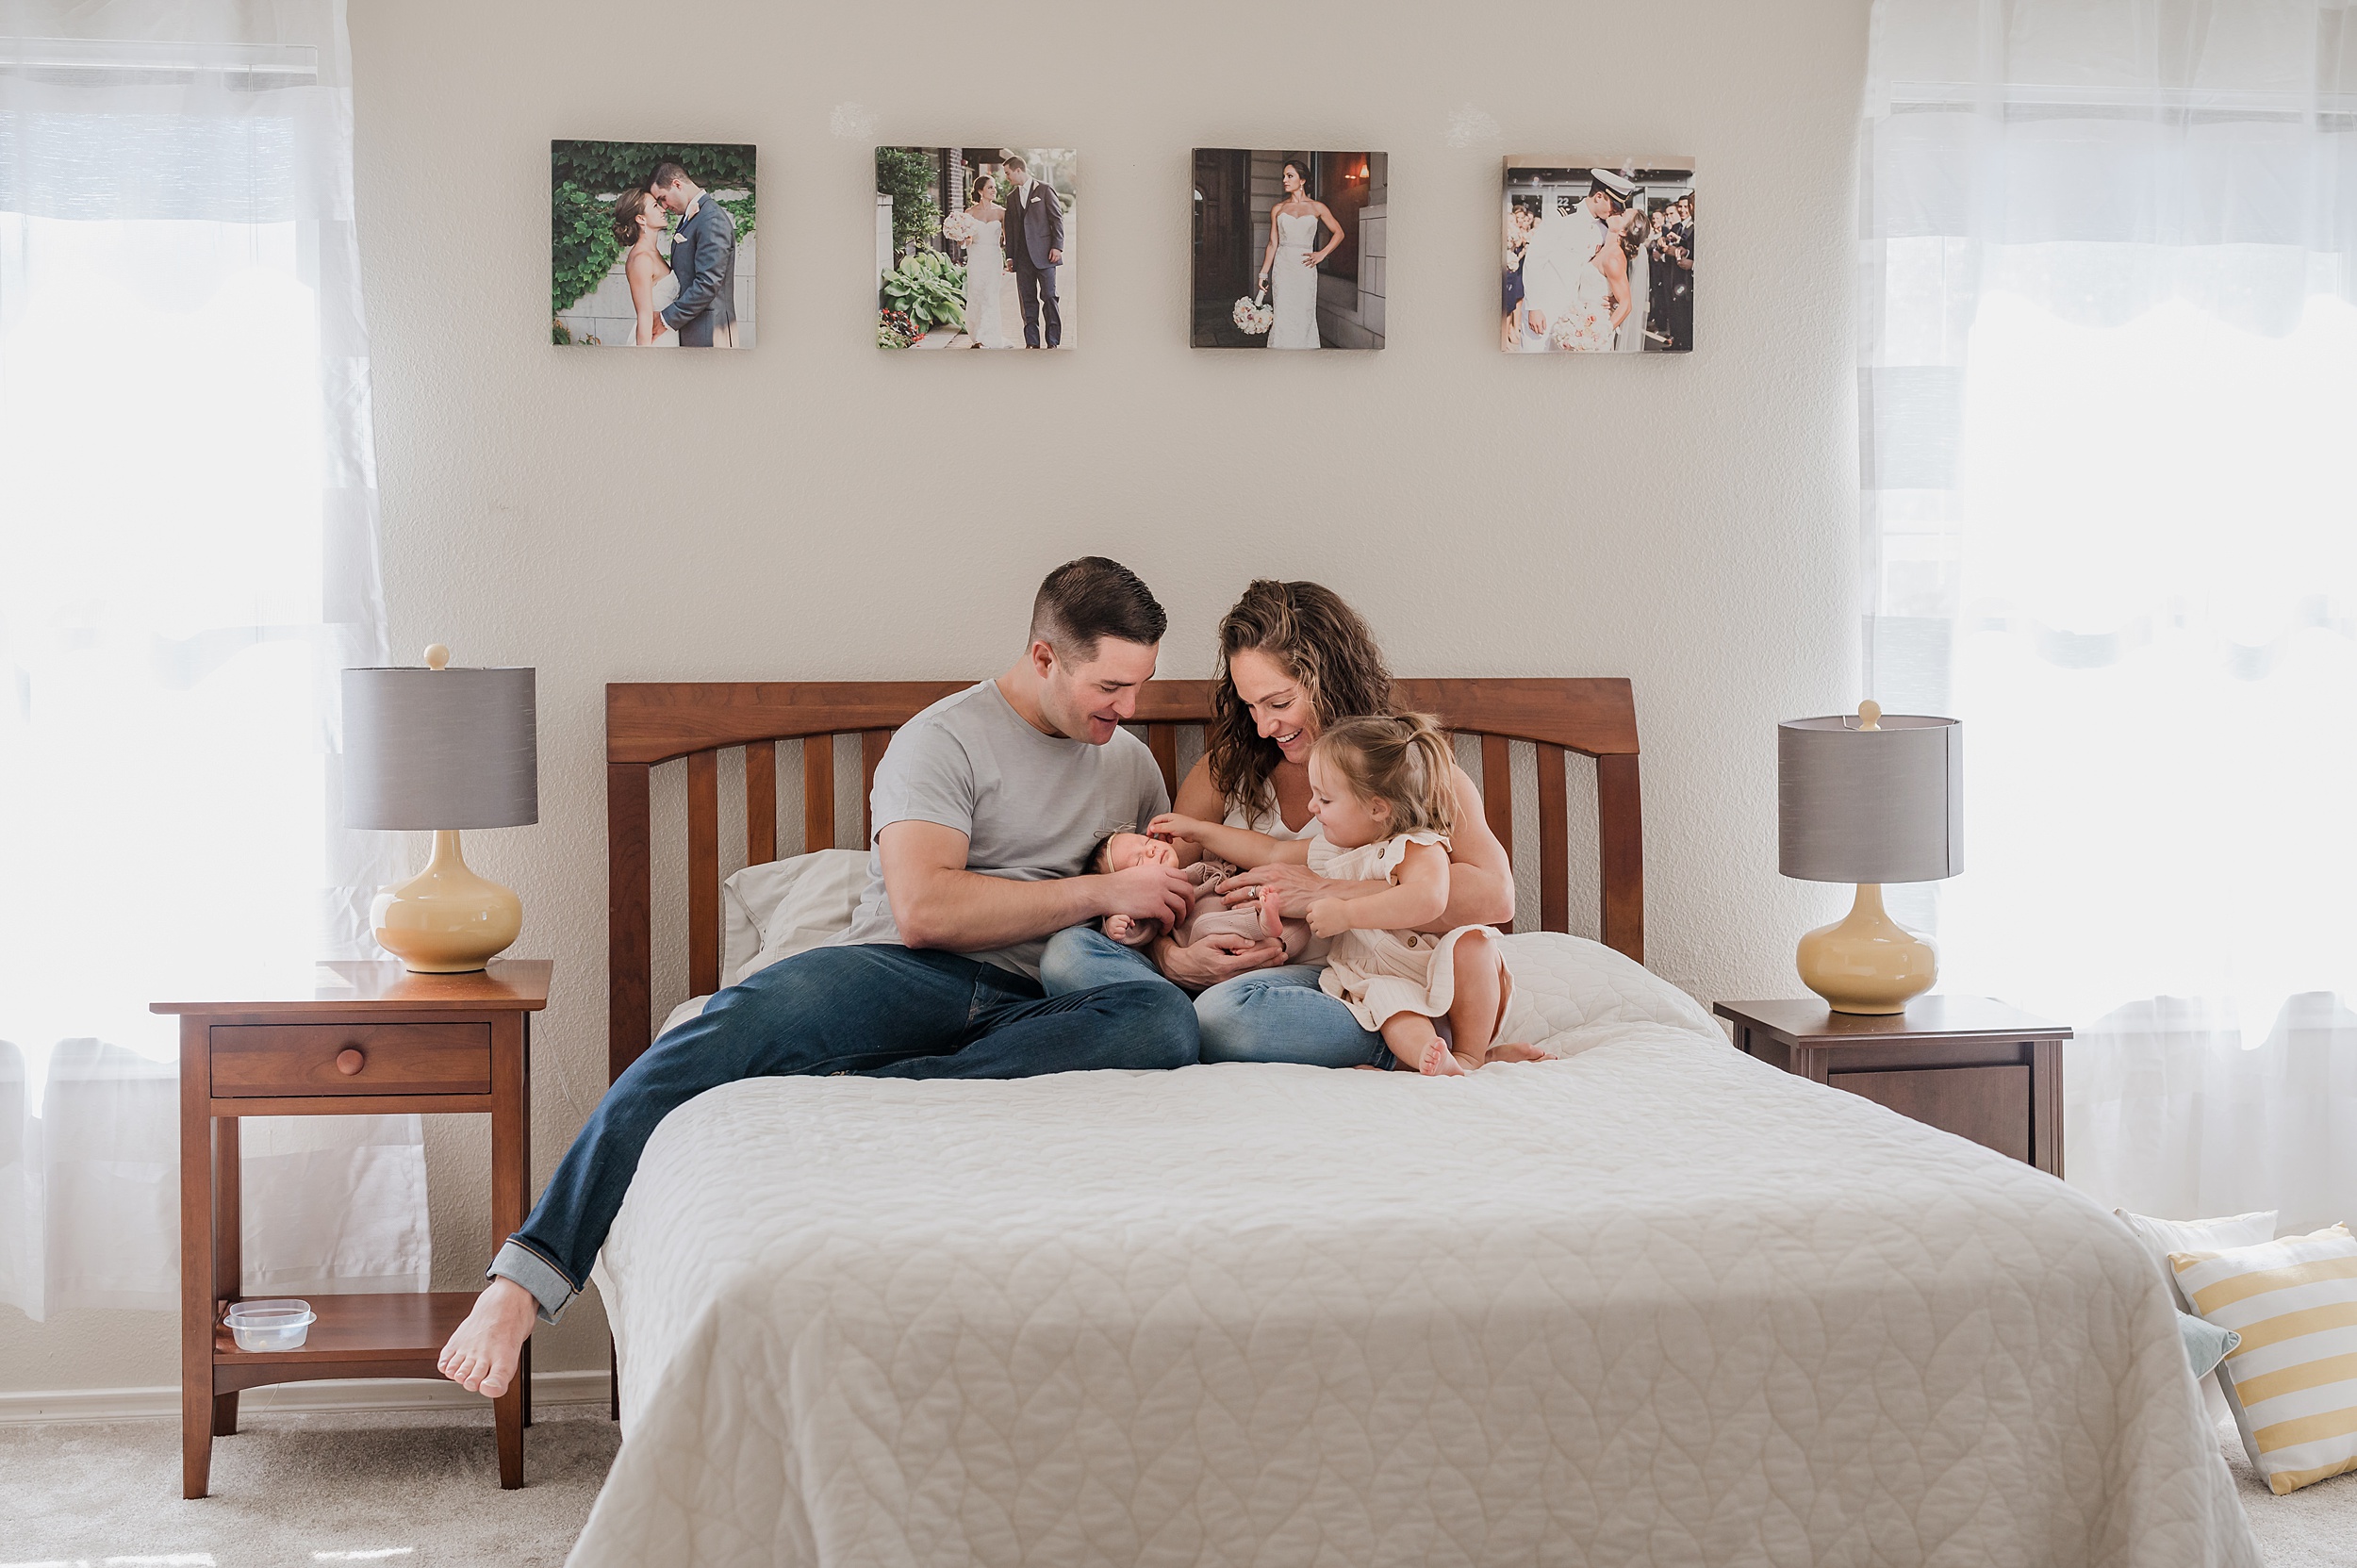 Mom and dad sit on a bed with their newborn baby girl in their laps while their toddler daughter reaches in